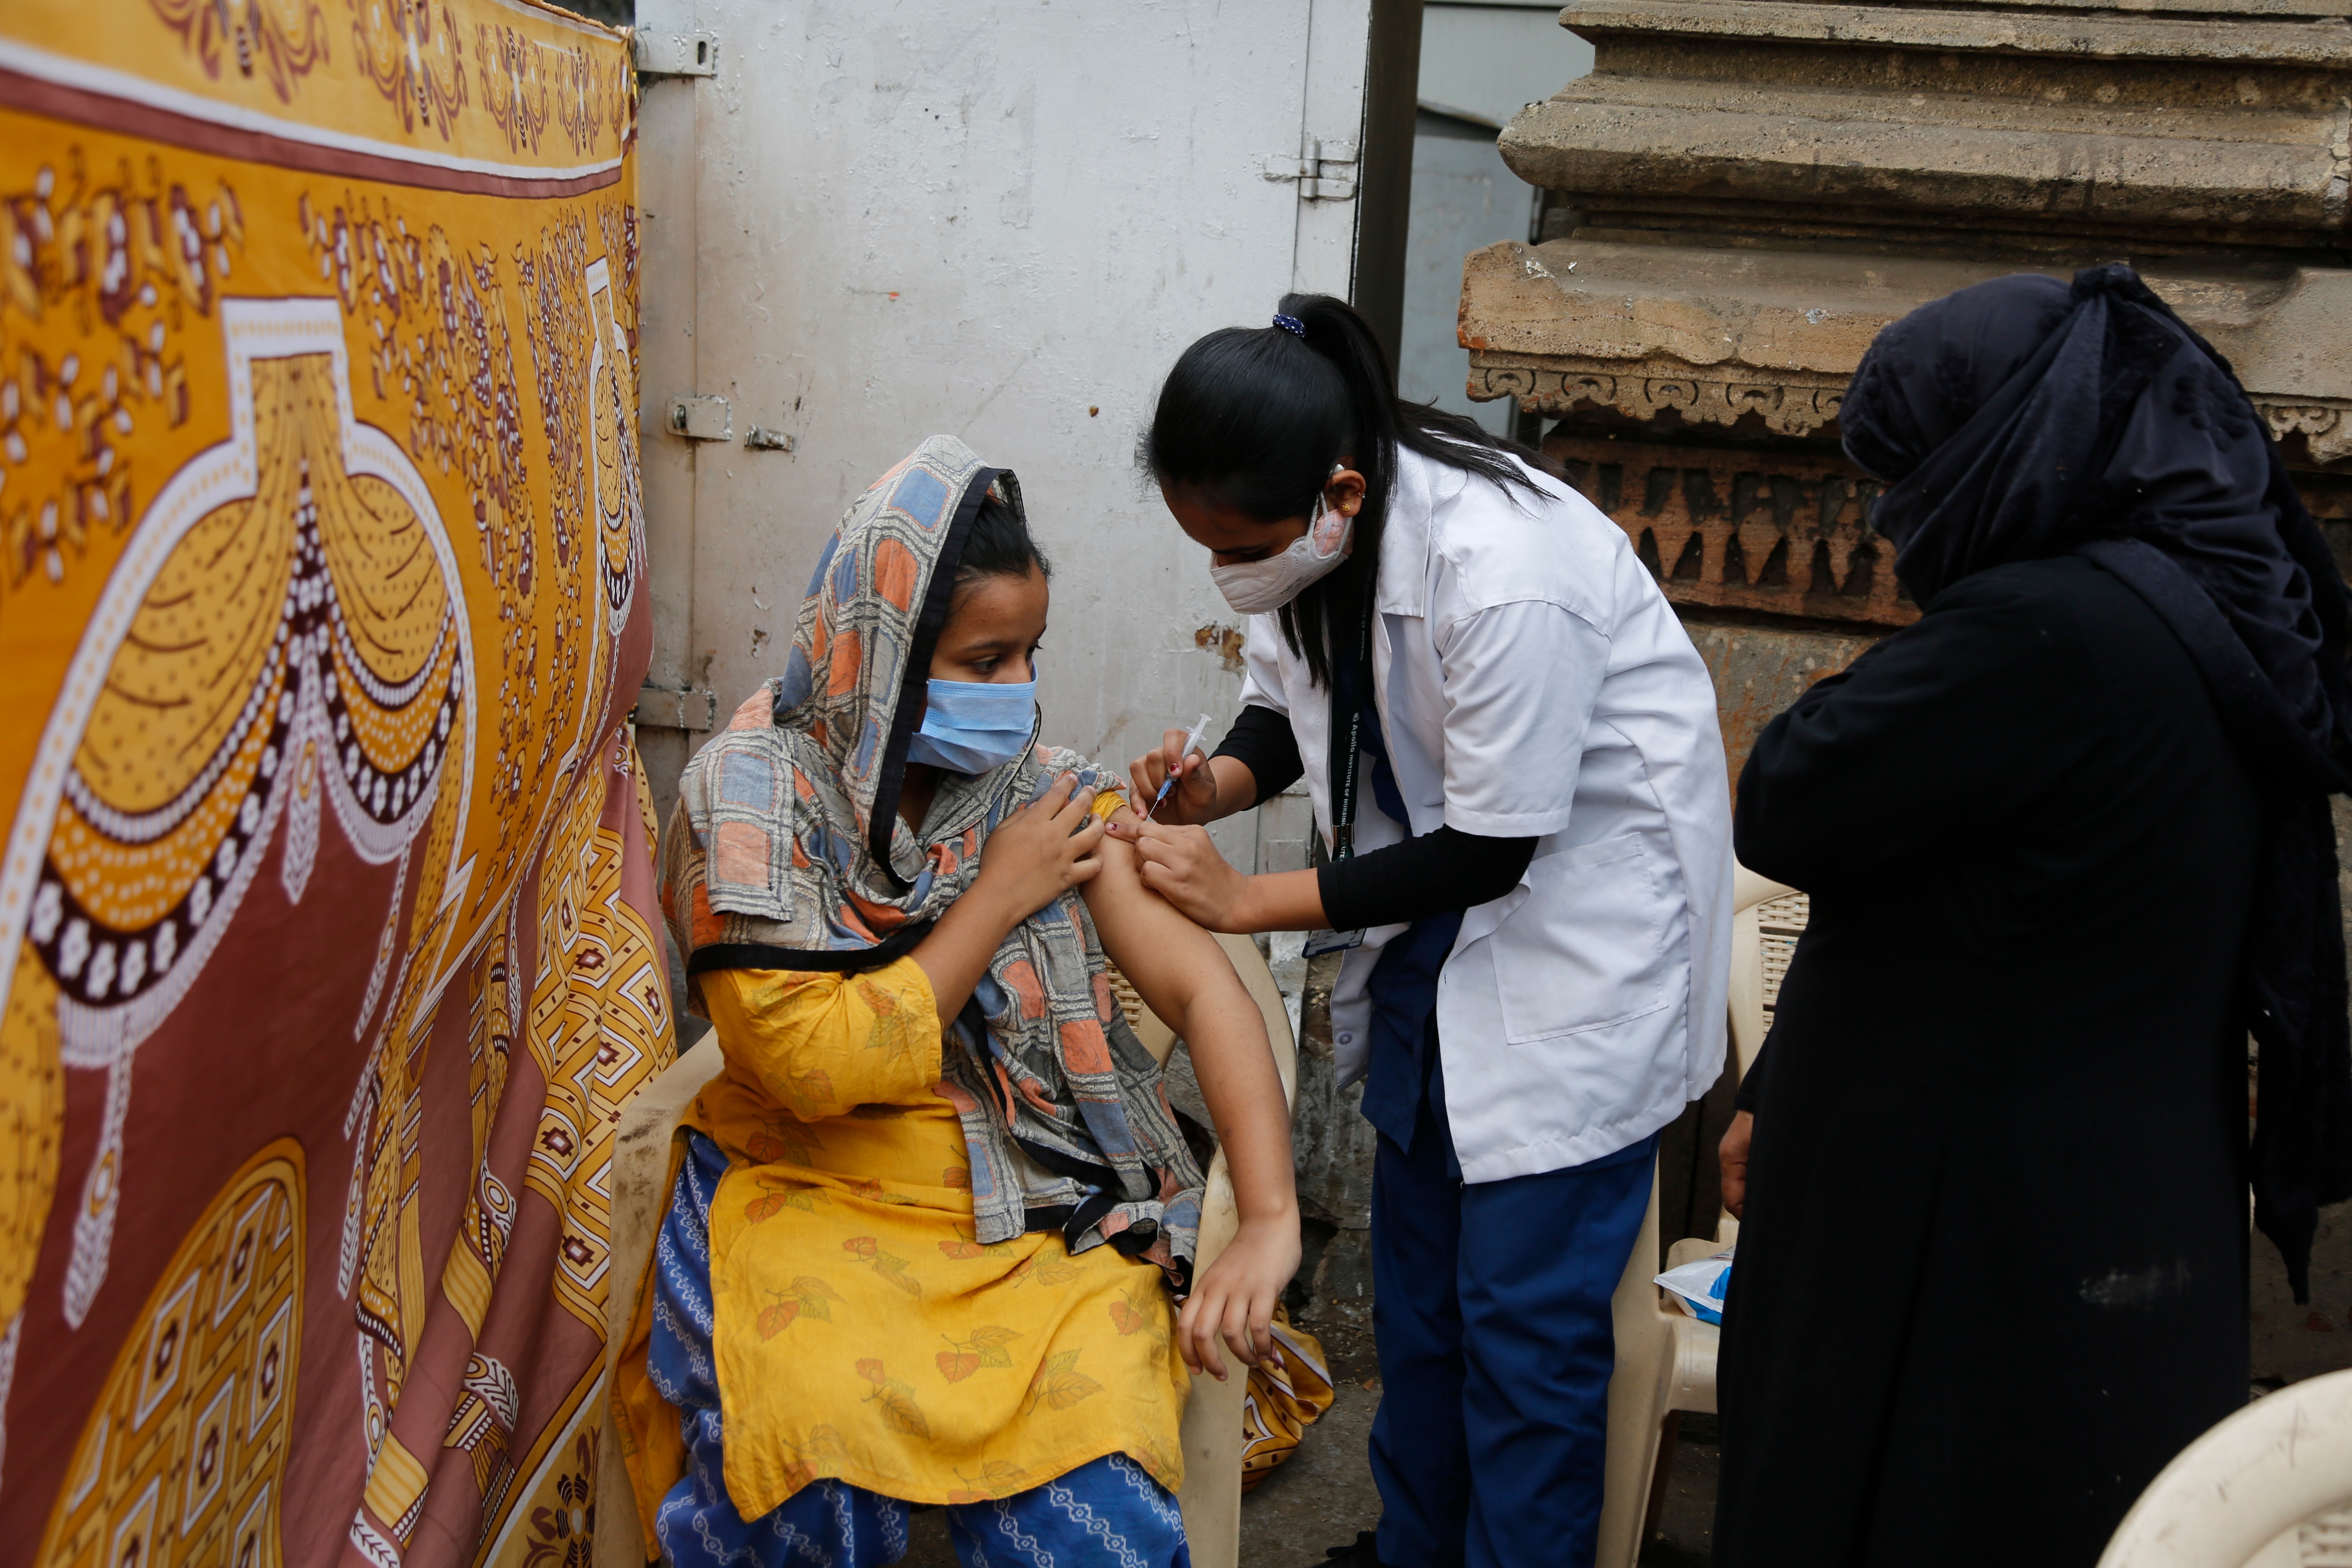 A health worker administers the vaccine for COVID-19 to a woman in Ahmedabad, India.